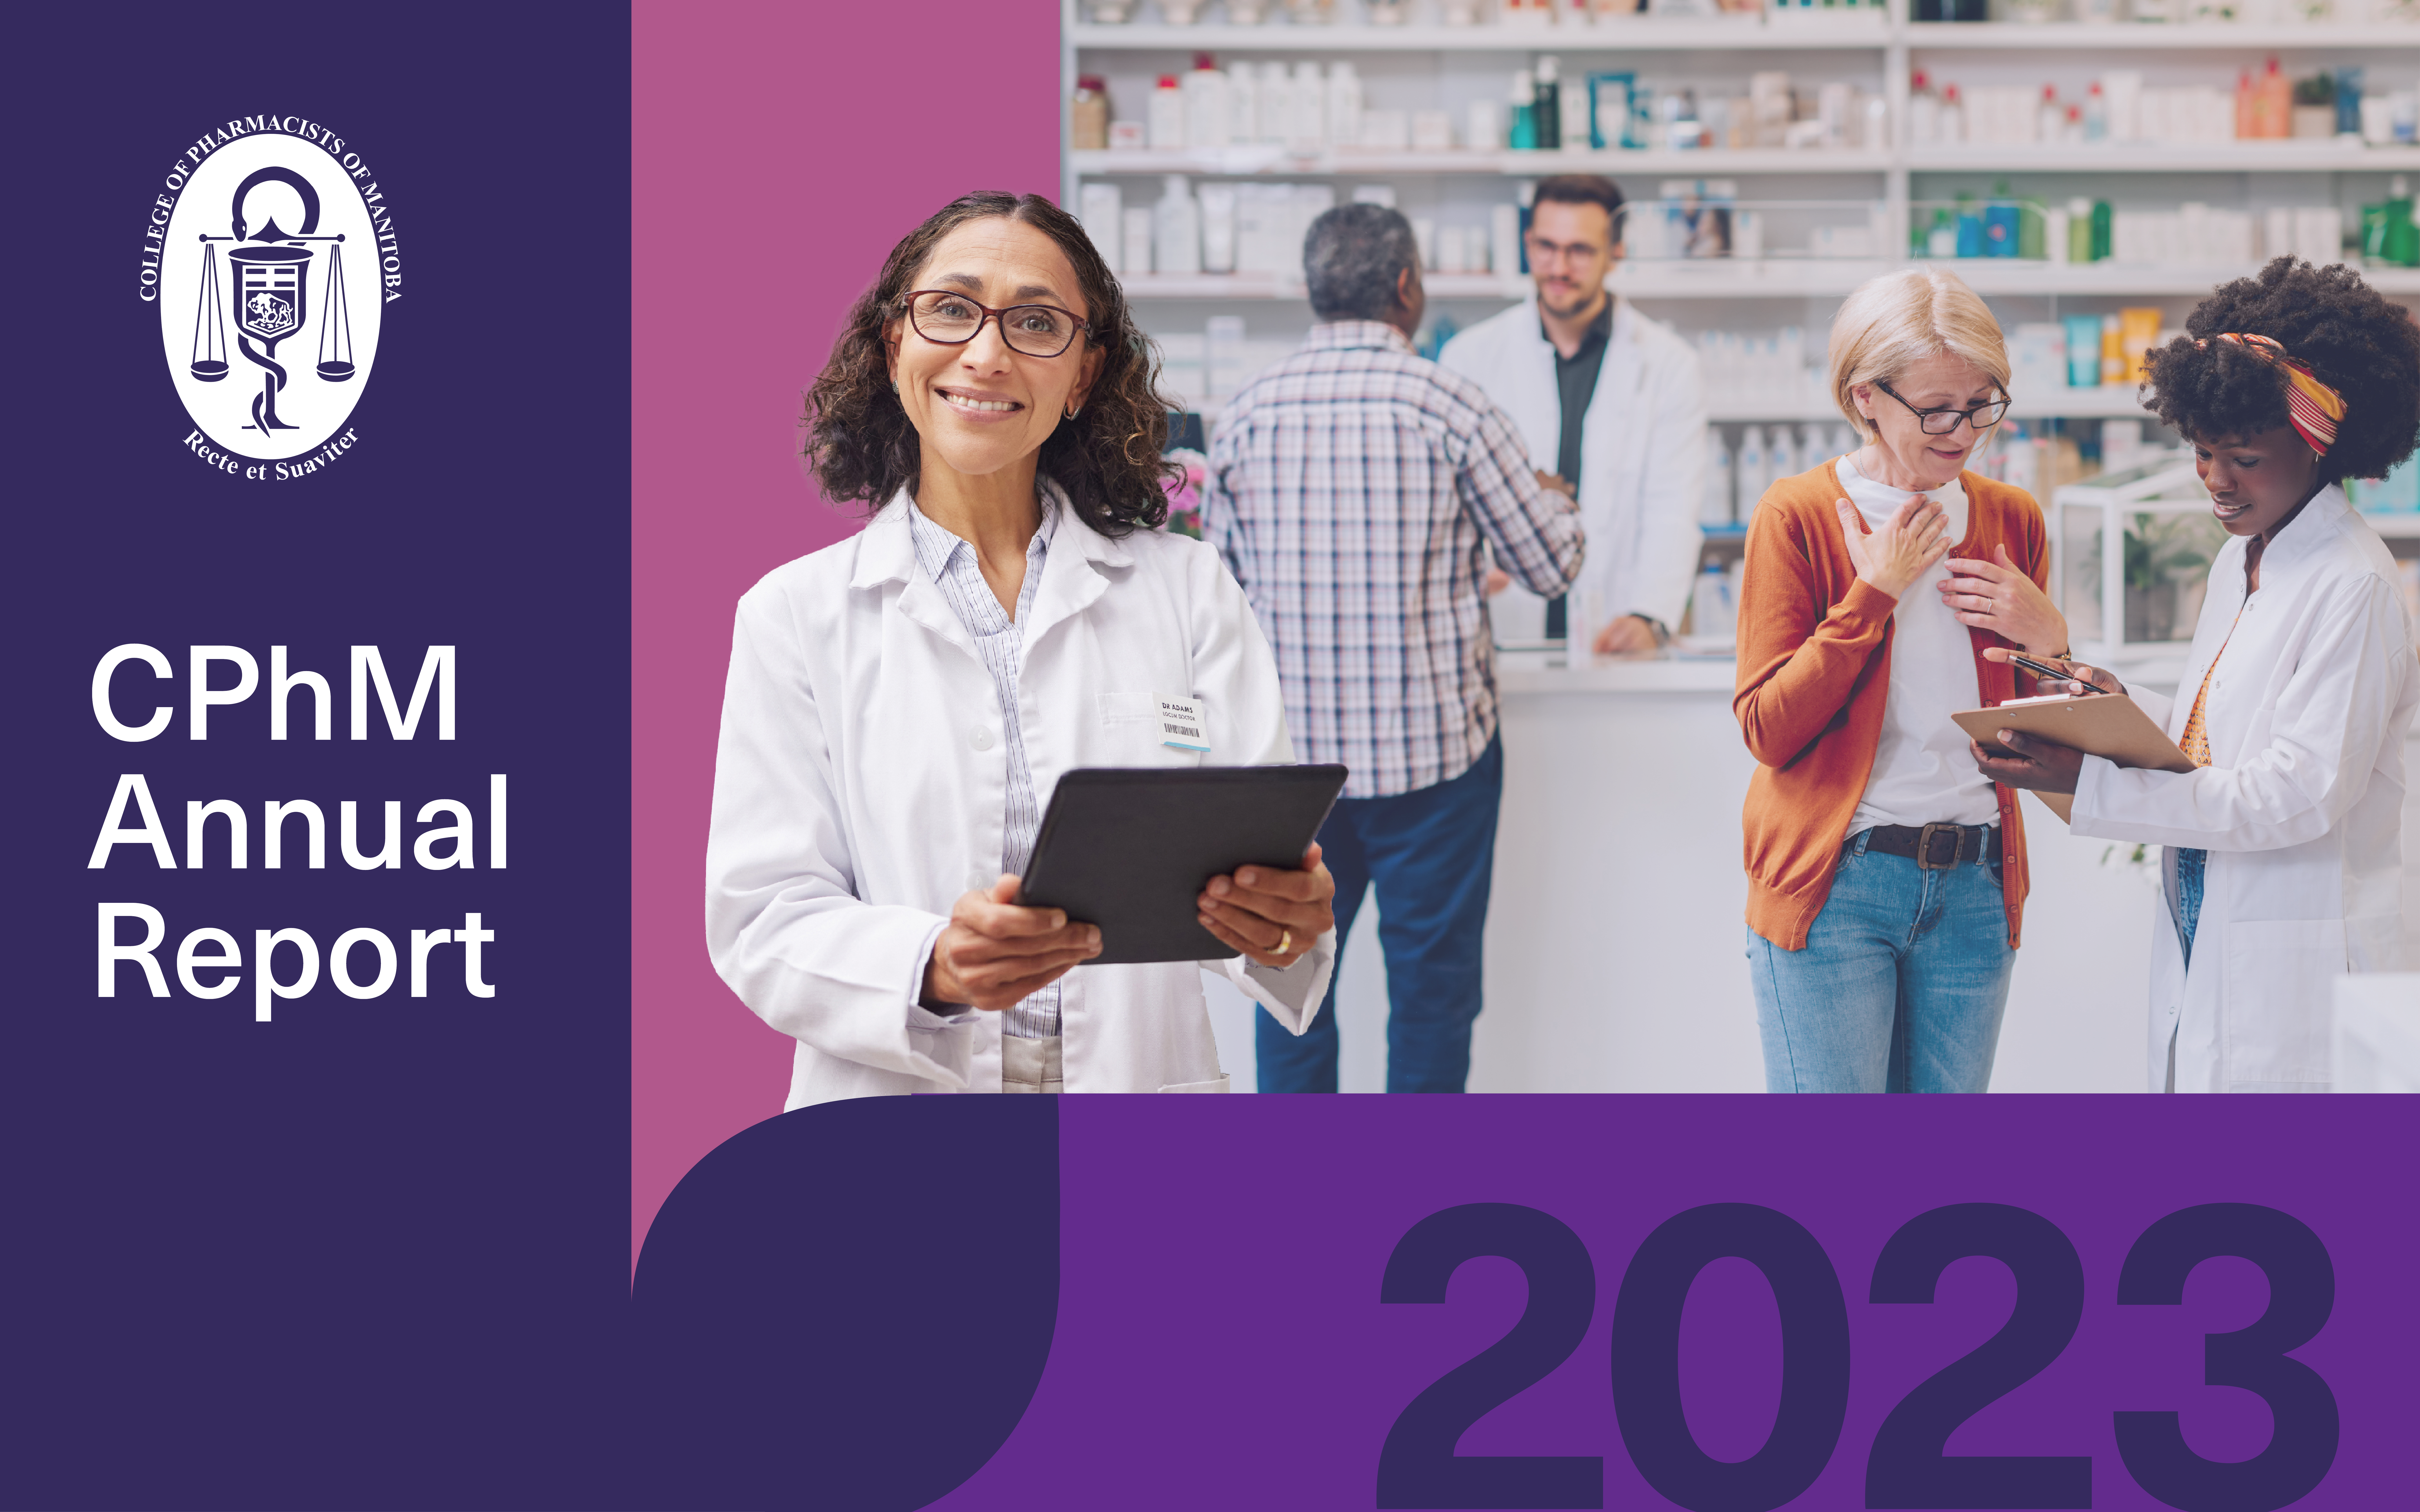 A female pharmacist stands in the forefront against a bustling pharmacy backdrop. The cover features the text "CPhM Annual Report 2023" in prominent font